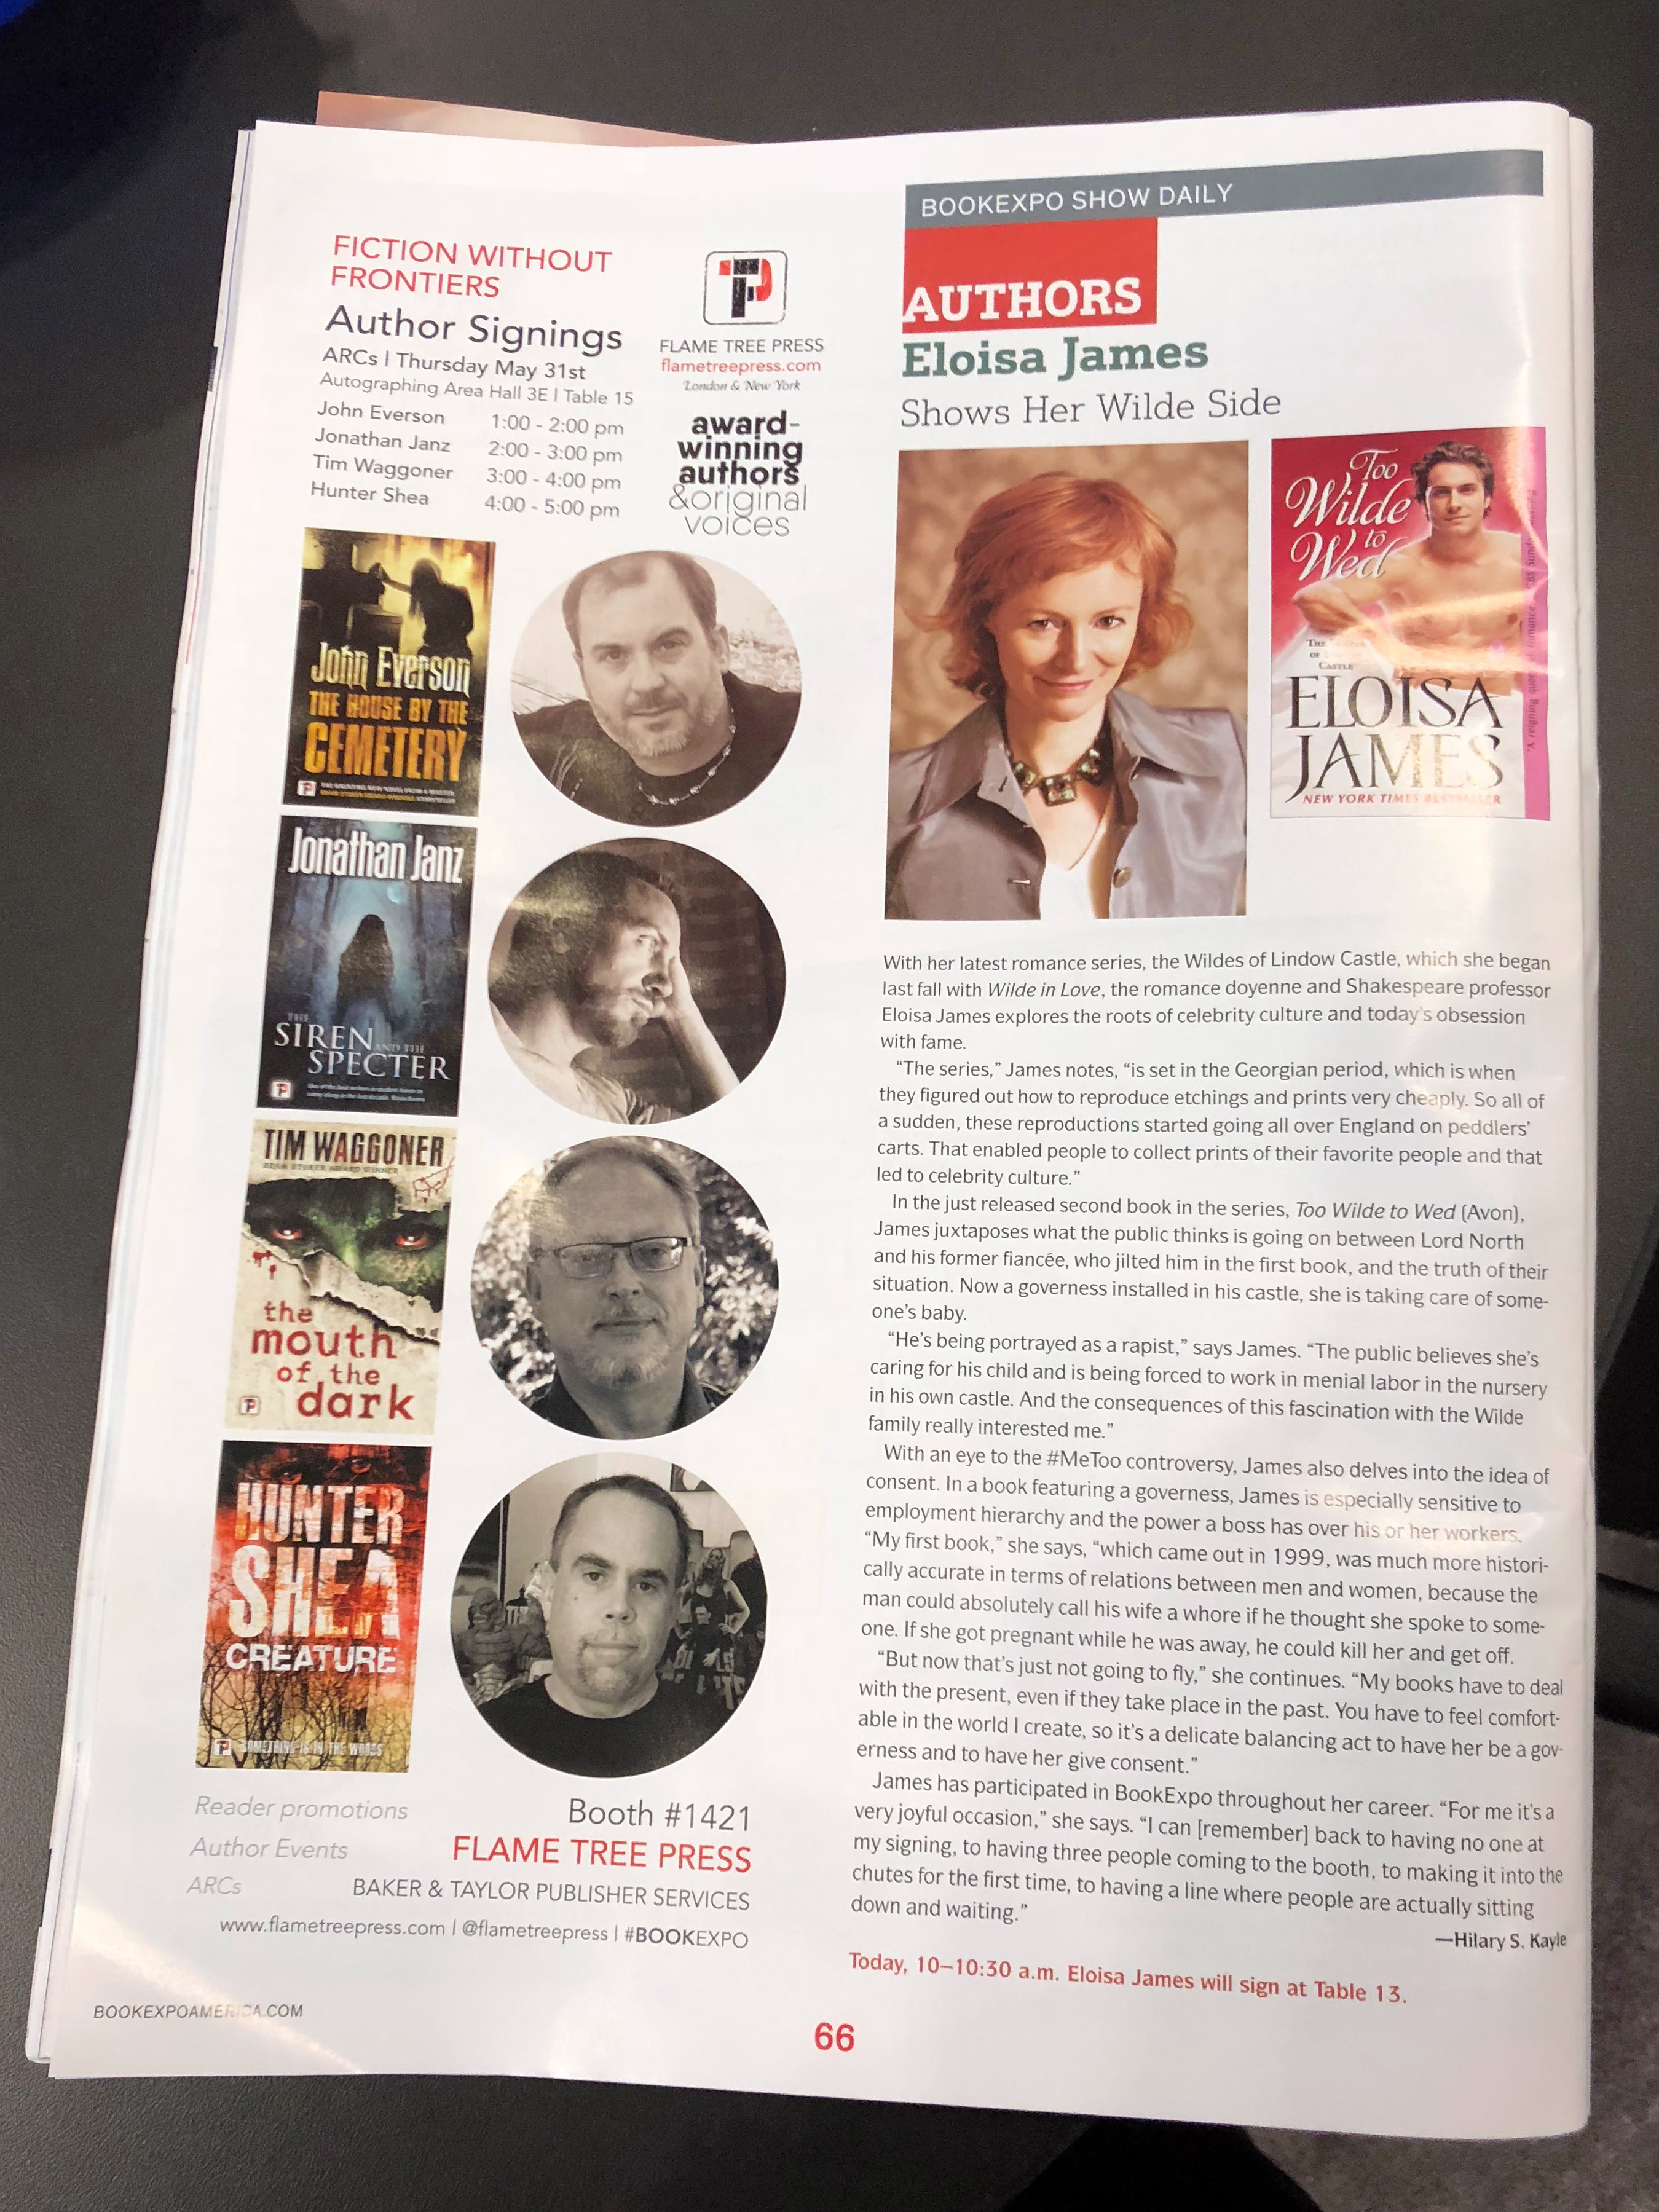 Publishers Weekly Show Daily, Flame Tree Press, at BookExpo18